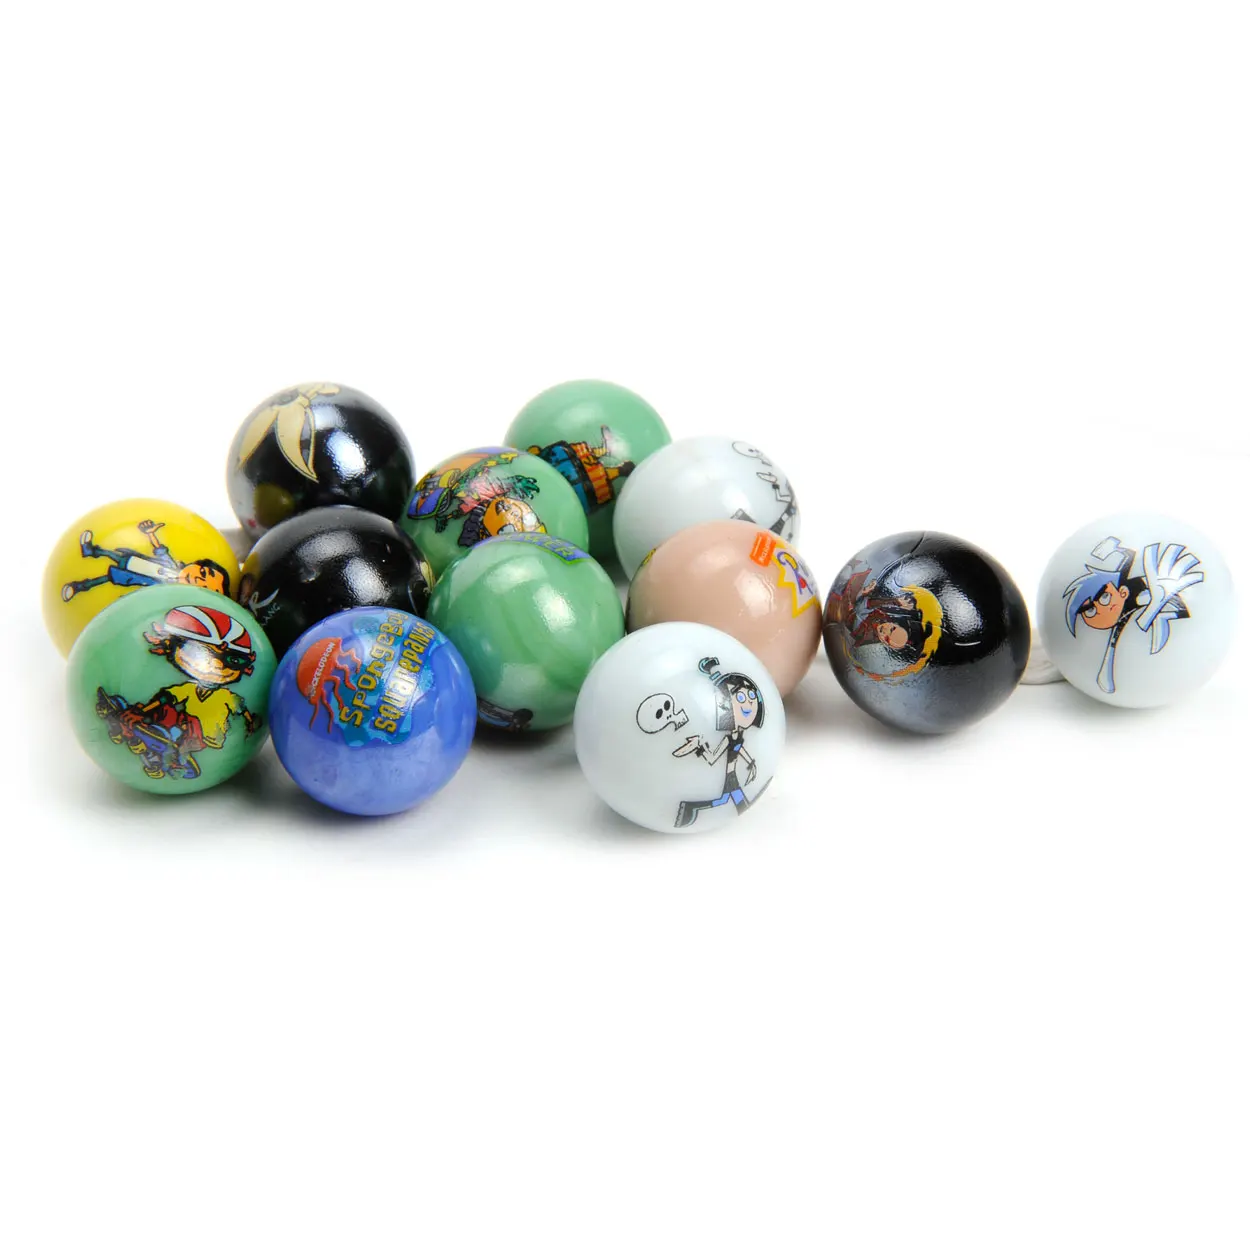 marble ball game